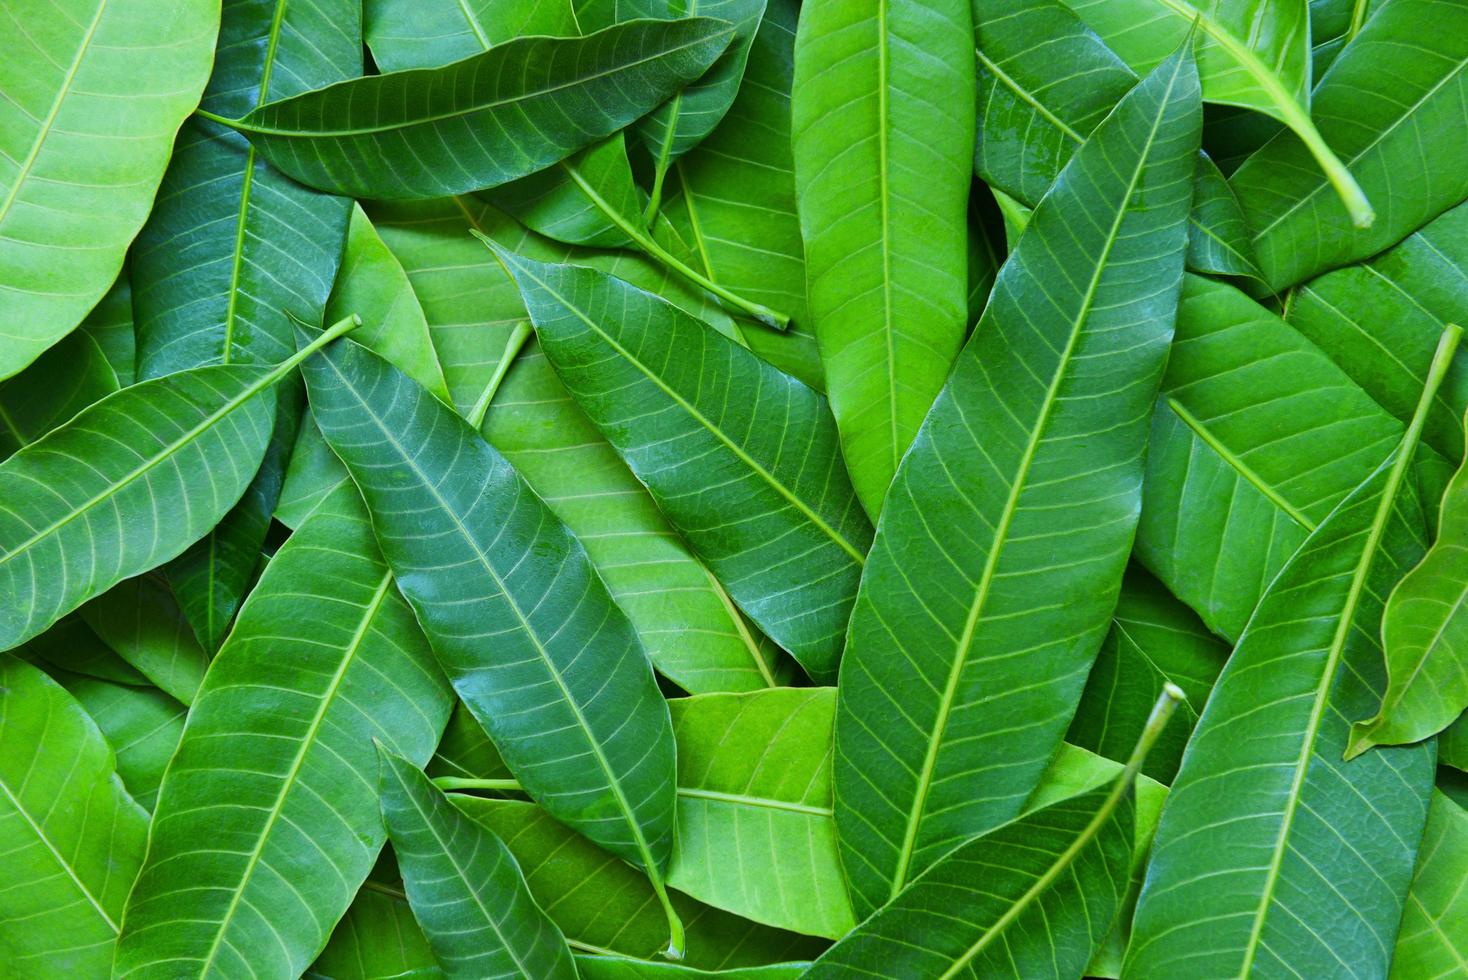 Mango leaves from tree , top view - Green seamless mango leaf texture background photo